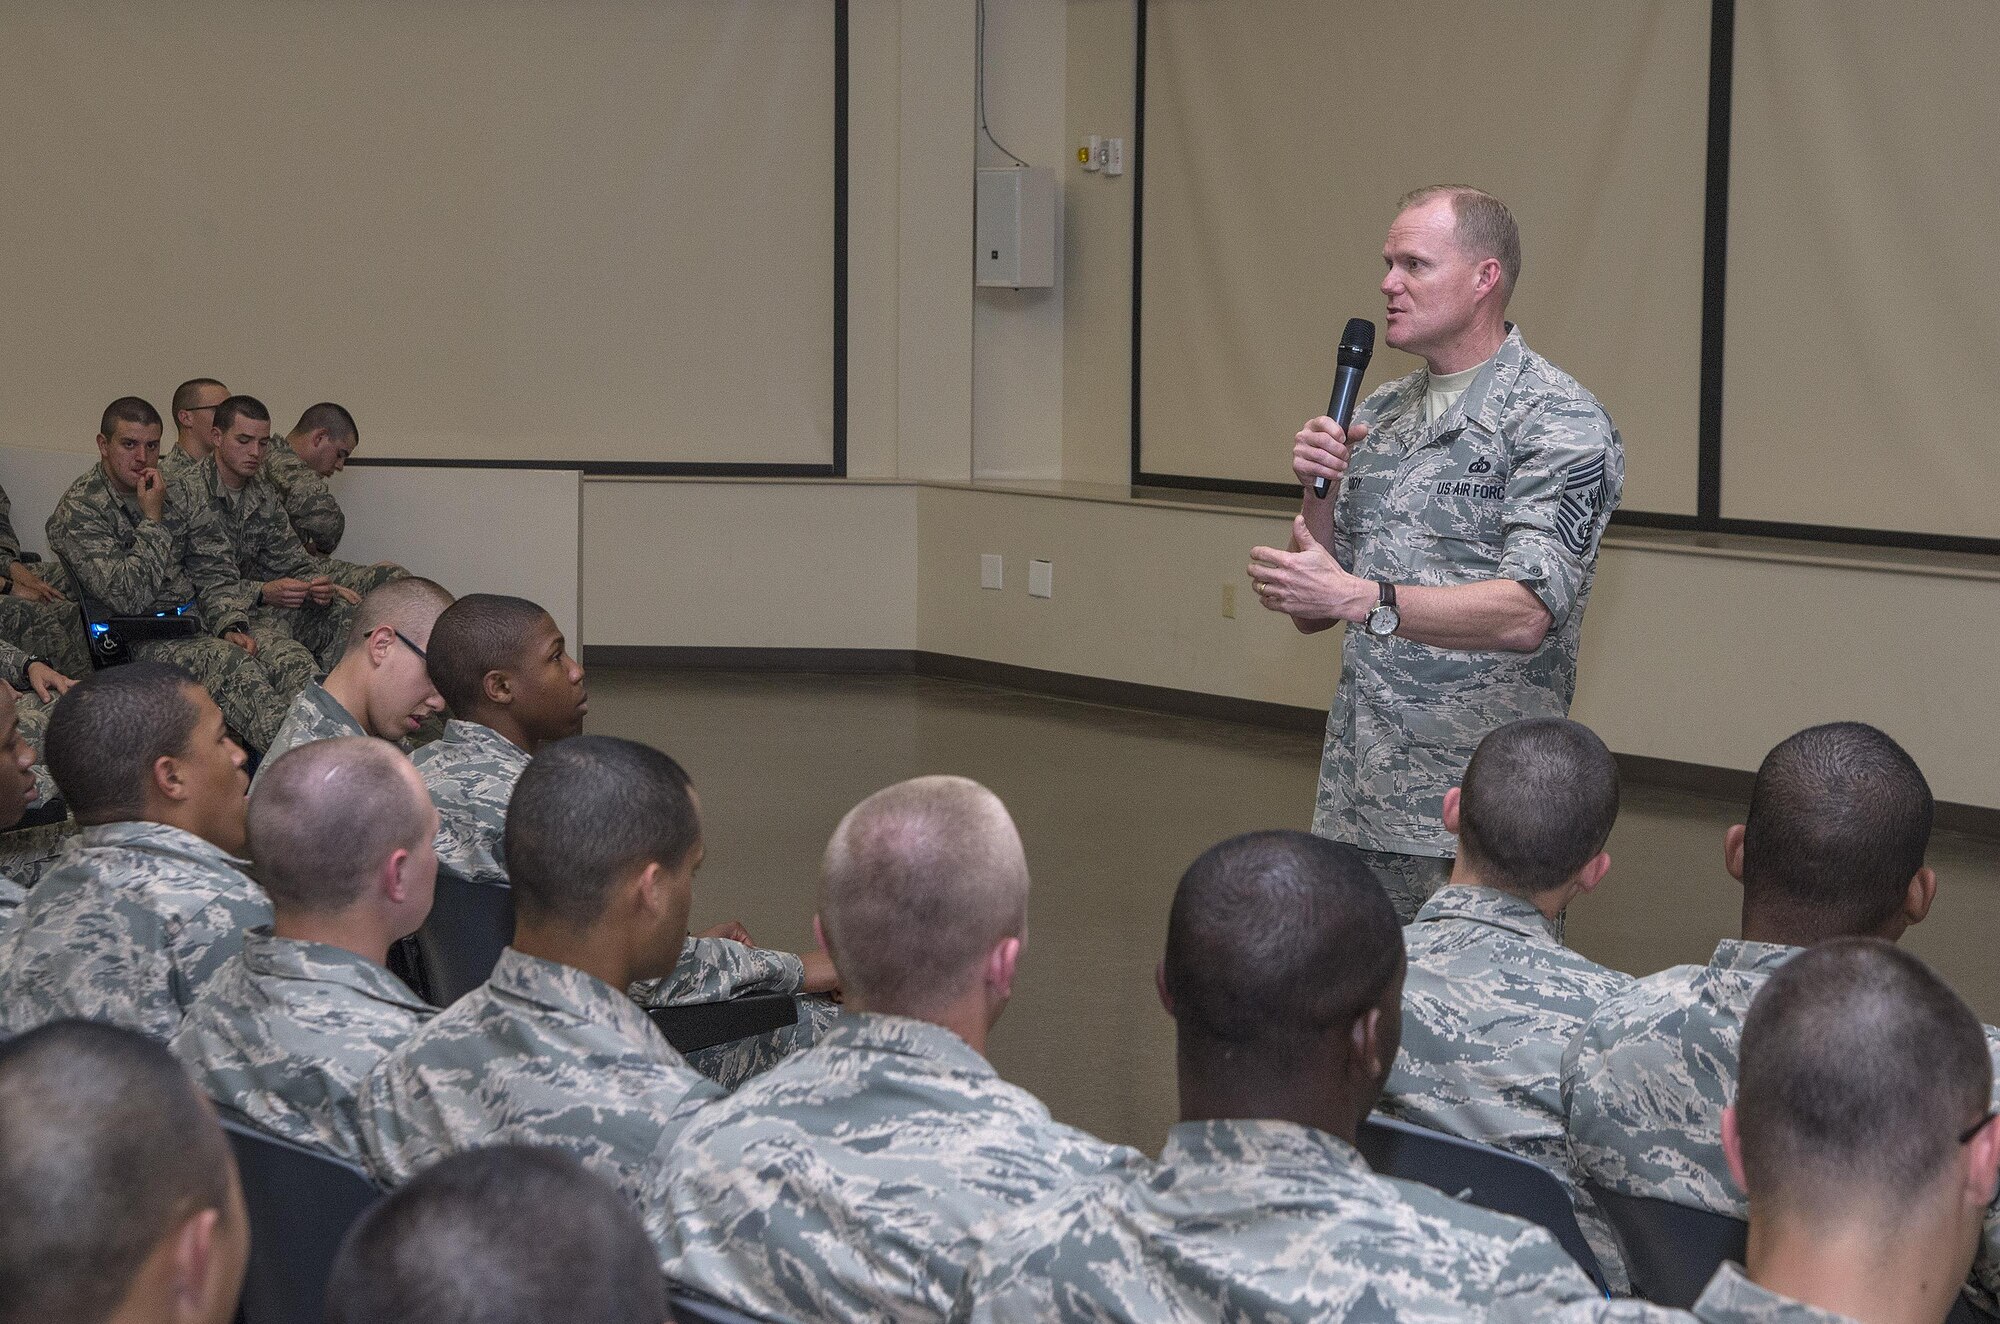 Chief Master Sgt. of the Air Force James A. Cody addresses the first Capstone Week class March 26, 2015, at Joint Base San Antonio-Lackland, Texas. Capstone is a five-day program that closes Air Force Basic Military Training. During Capstone, the Air Force's newest Airmen learn about the importance of wingmanship, resiliency, leadership and followership, sexual assault prevention and response, the warrior ethos, and how Airmen can balance their personal and professional lives. Capstone Week’s purpose is to further develop professional, resilient Airmen who are inspired by heritage, committed to its core values, and motivated to deliver airpower. While BMT will still provide new Airmen the same high level of military and physical training, Capstone Week serves to specifically concentrate on character building. (U.S. Air Force photo by Johnny Saldivar)